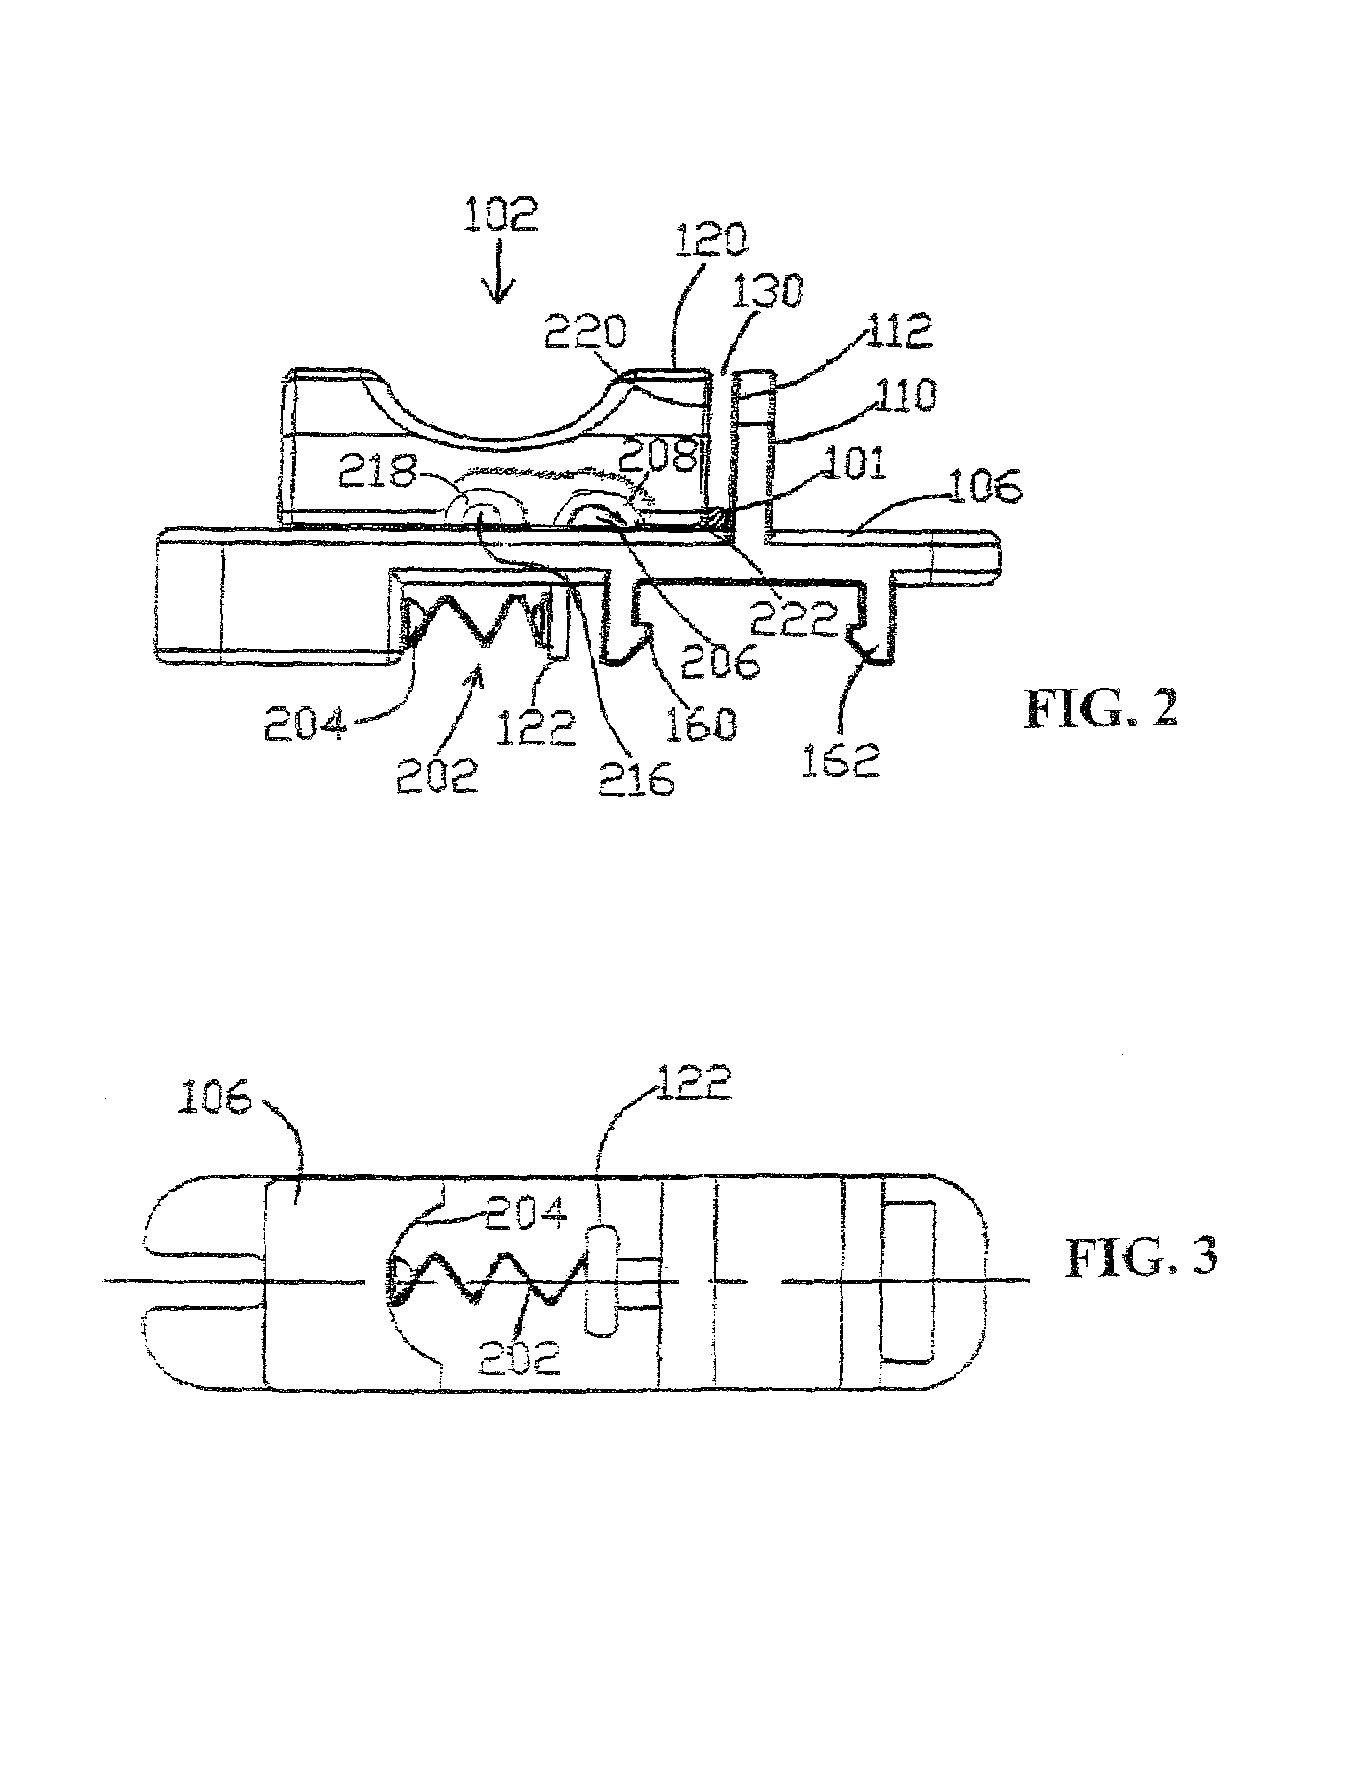 Vascular adjustable multi-gauge tilt-out method and apparatus for guiding needles